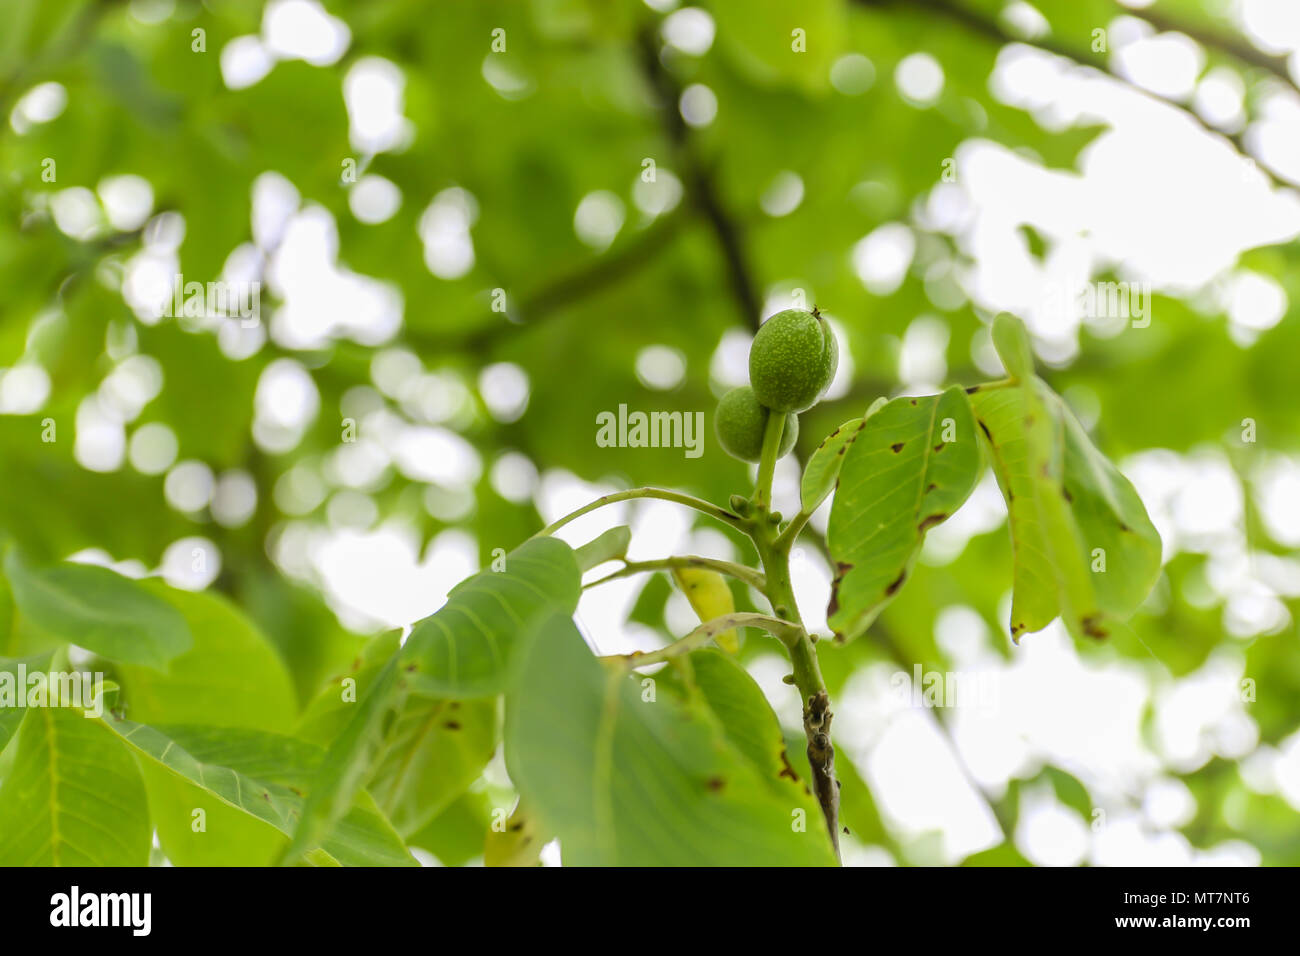 Young fruit of the walnut with green shell on branch with green leaves. Stock Photo